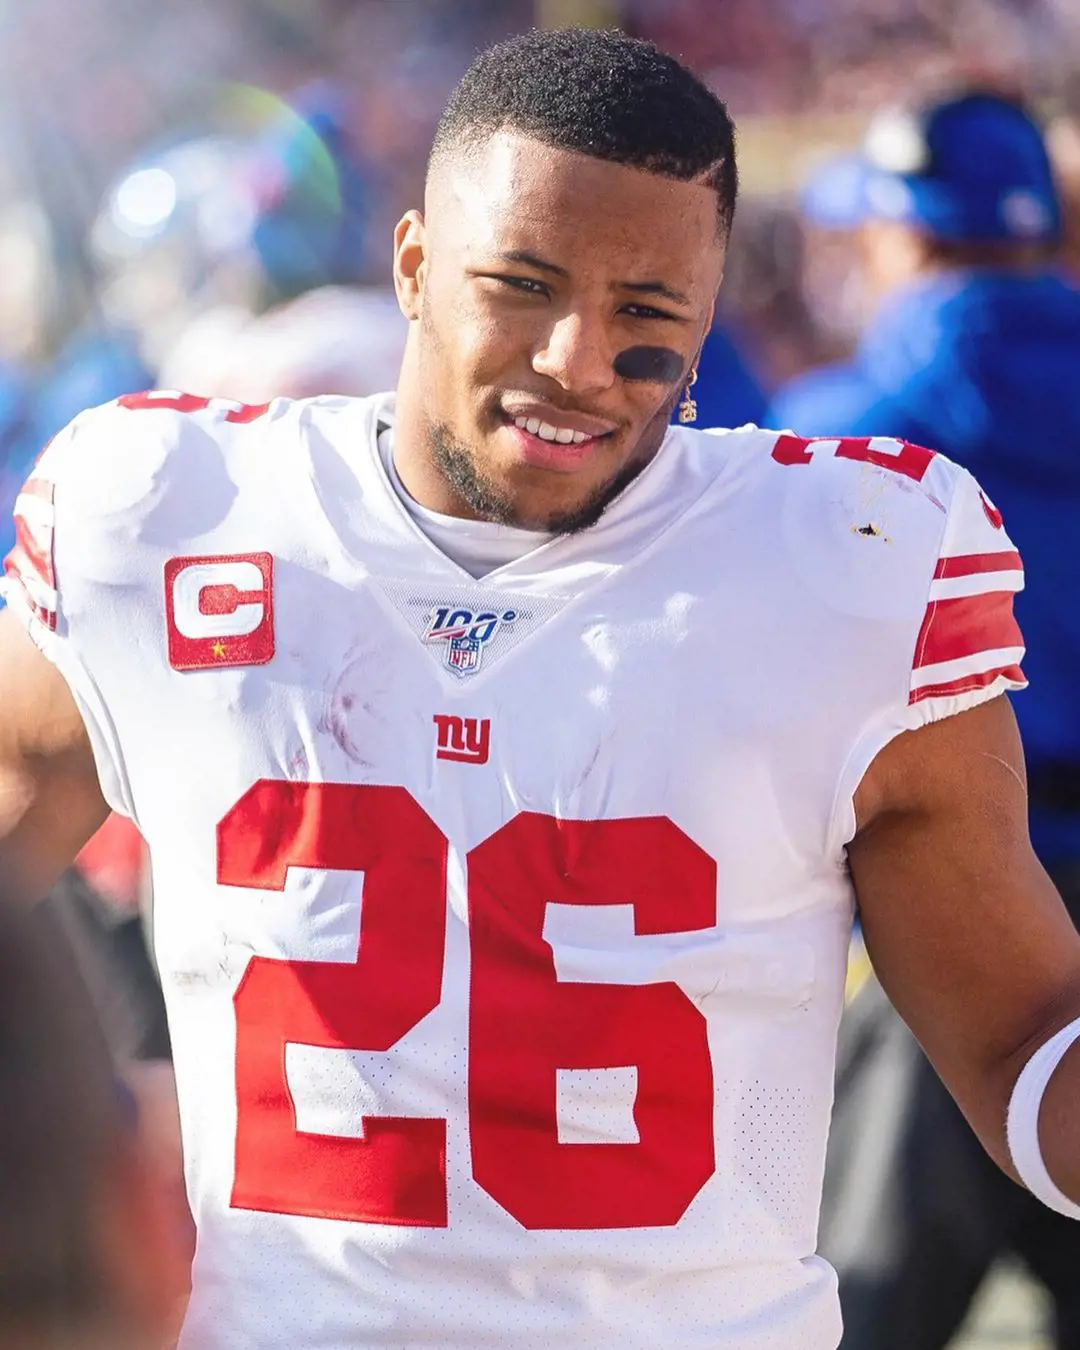 Saquon during his game on March 4, 2020 at Los Angeles California.